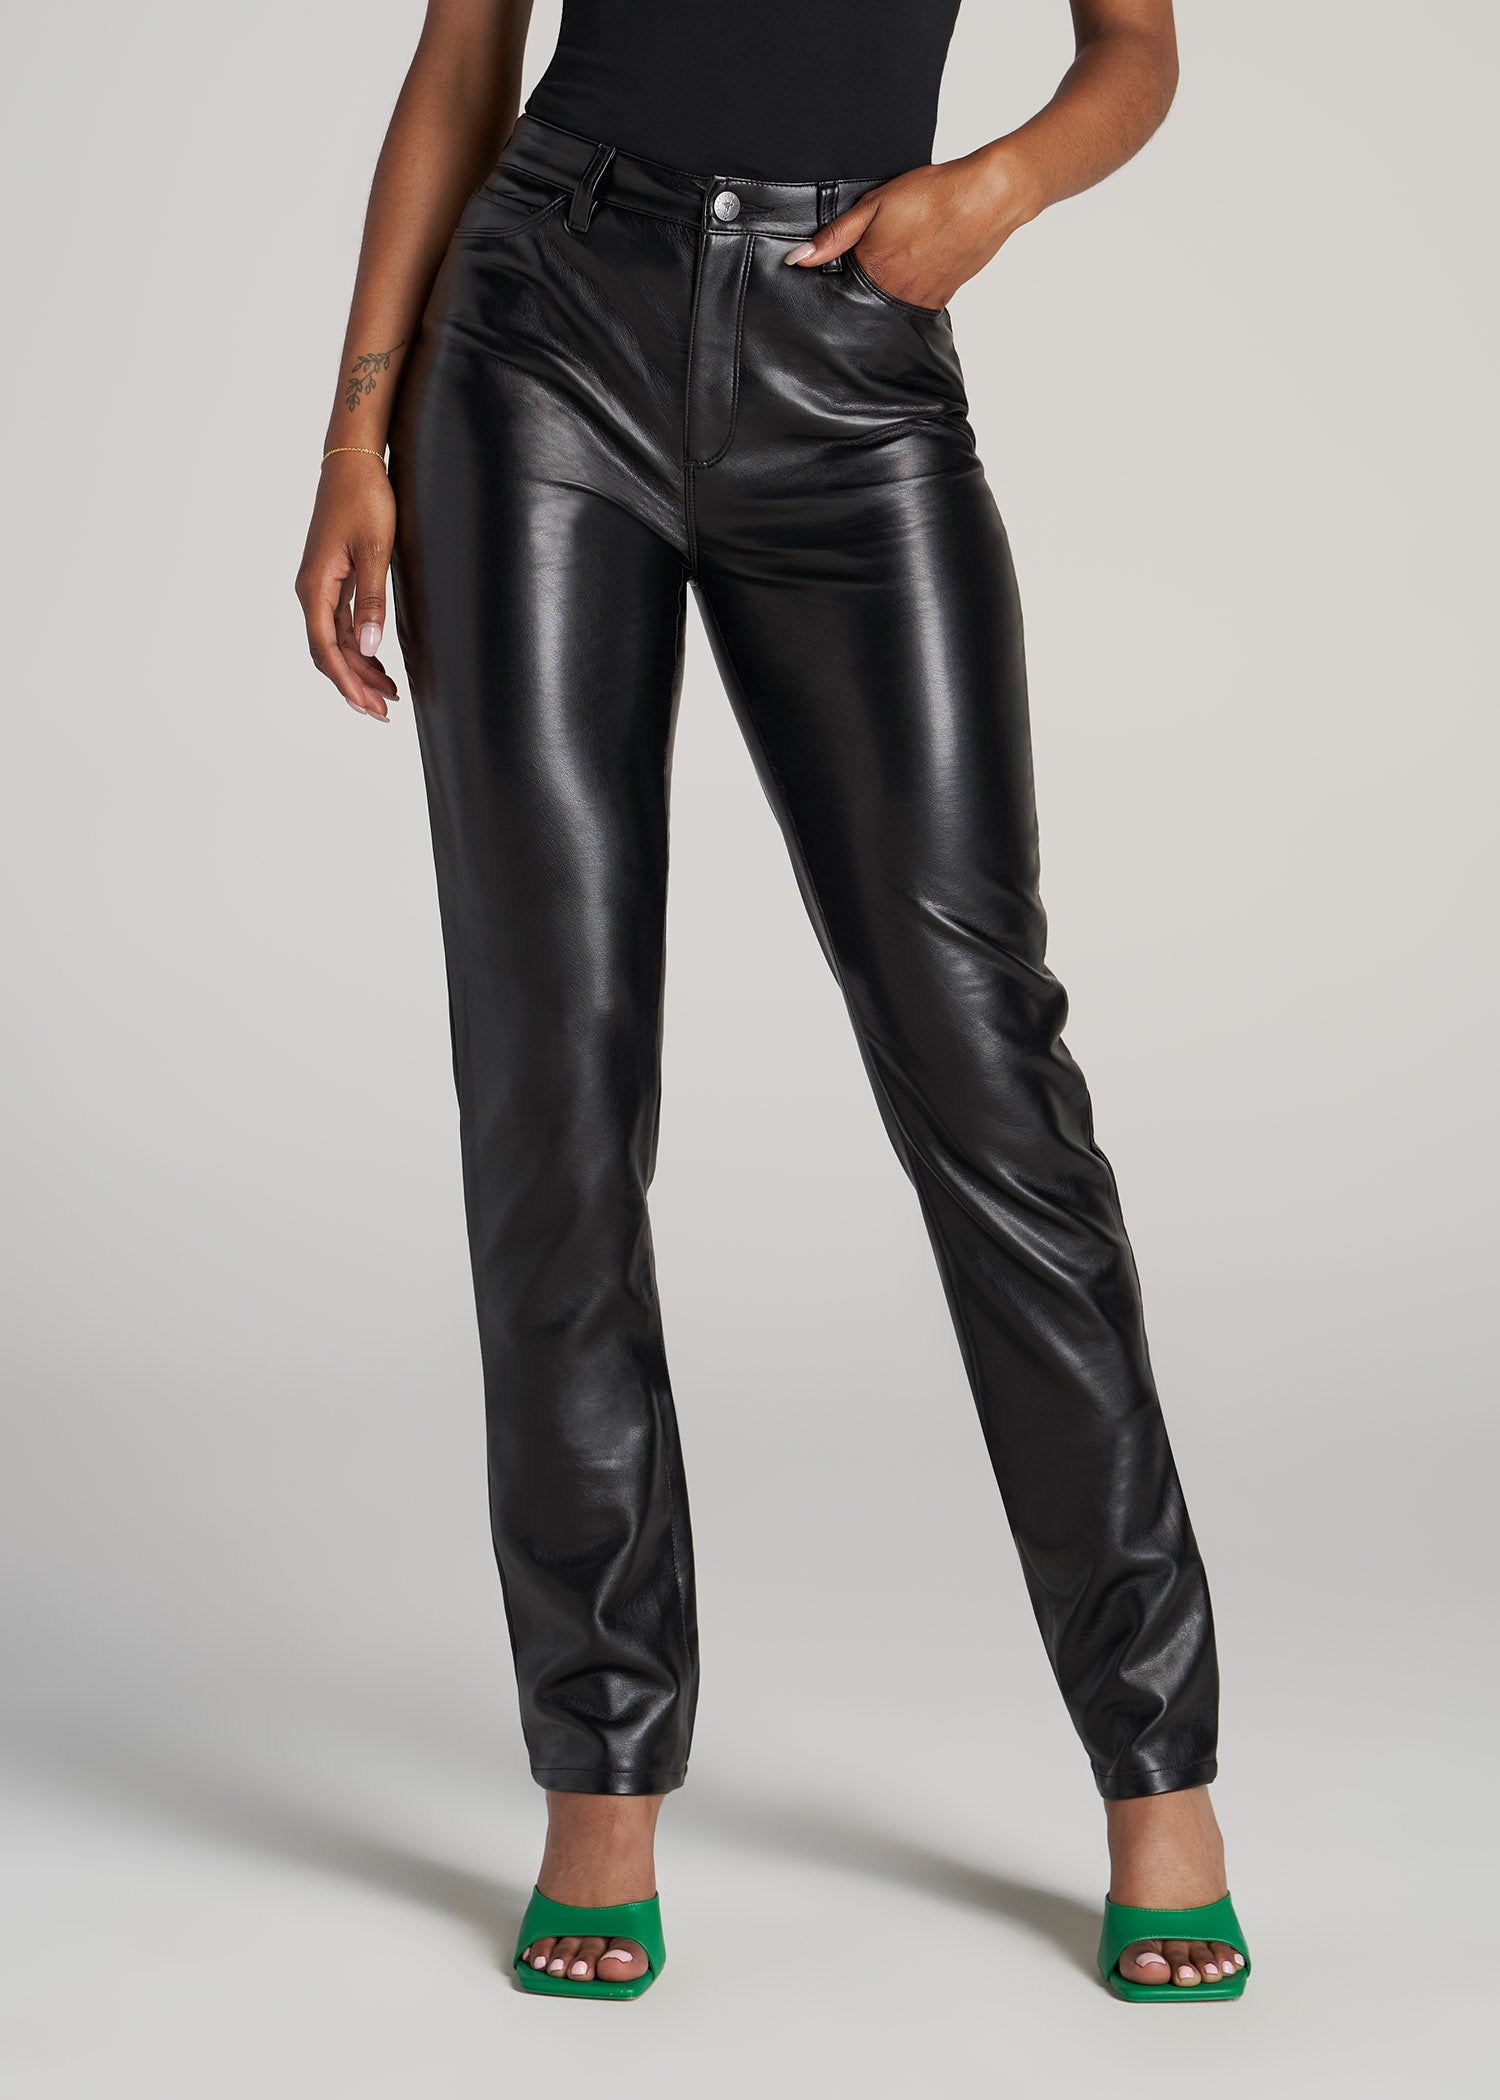 Faux Leather SLIM Pants for Tall Women in Black